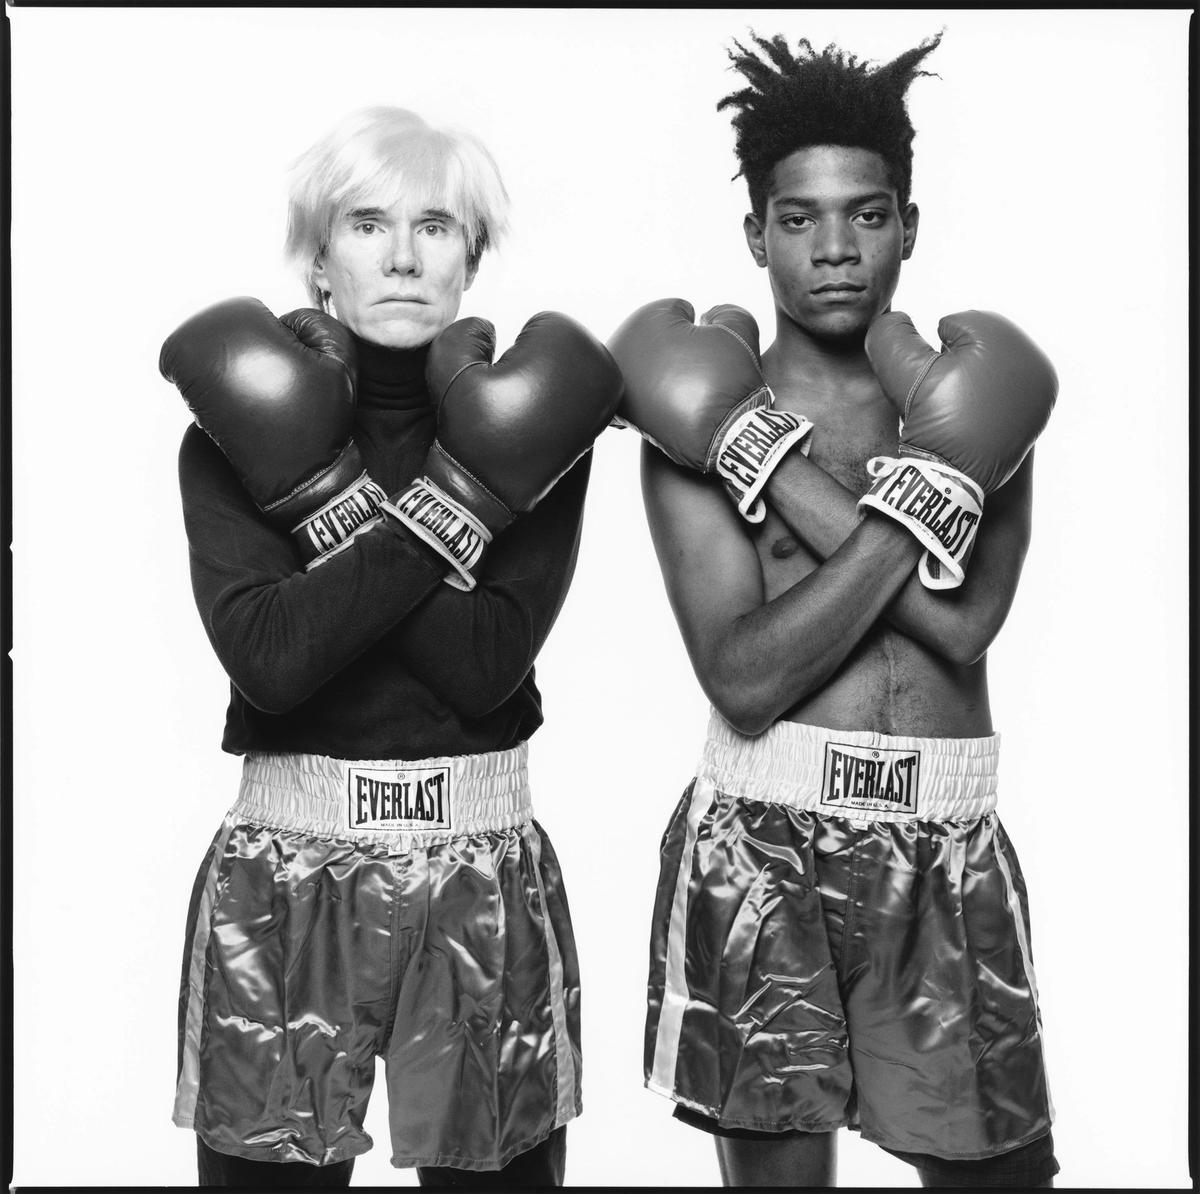 Michael Halsband's Andy Warhol and Jean-Michel Basquiat #143 (1985)

Courtesy of the artist